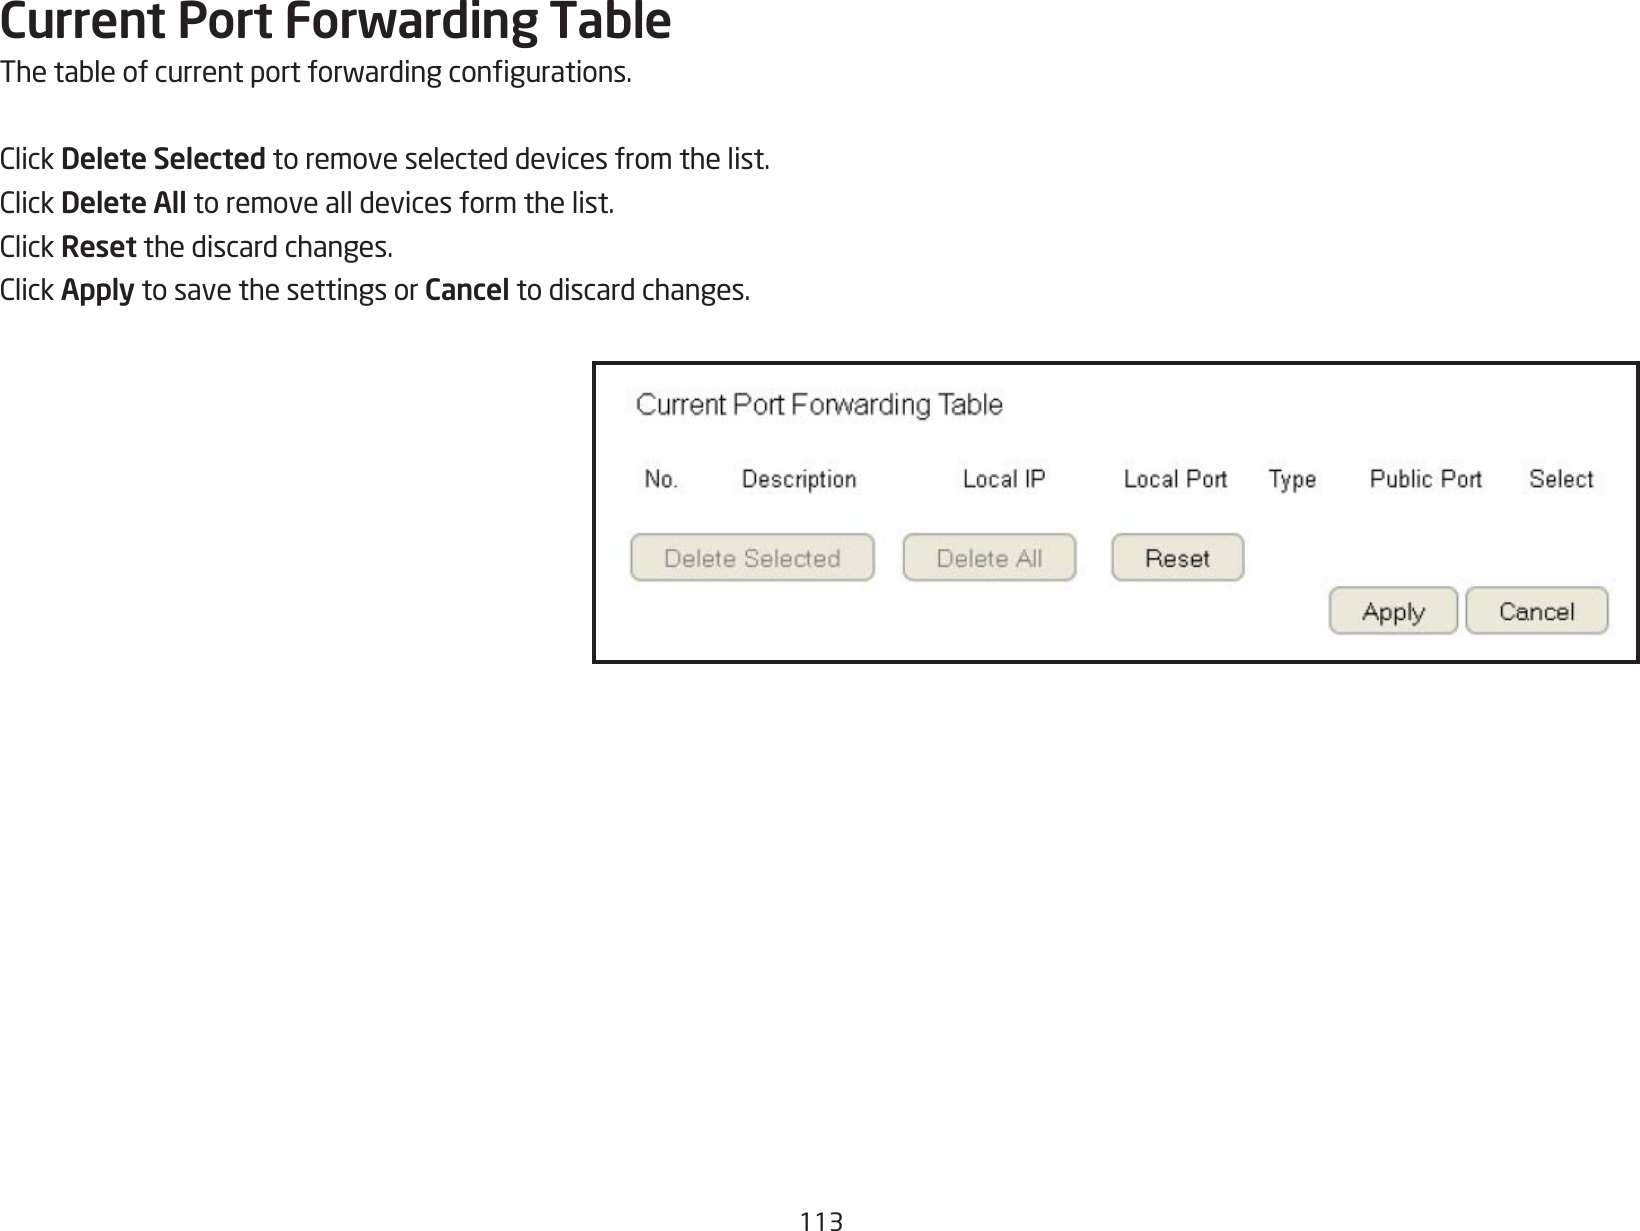 113Current Port Forwarding TableThetableofcurrentportforwardingcongurations.ClickDelete Selected to remove selected devices from the list.ClickDelete All to remove all devices form the list.ClickReset the discard changes.ClickApply to save the settings or Cancel to discard changes.